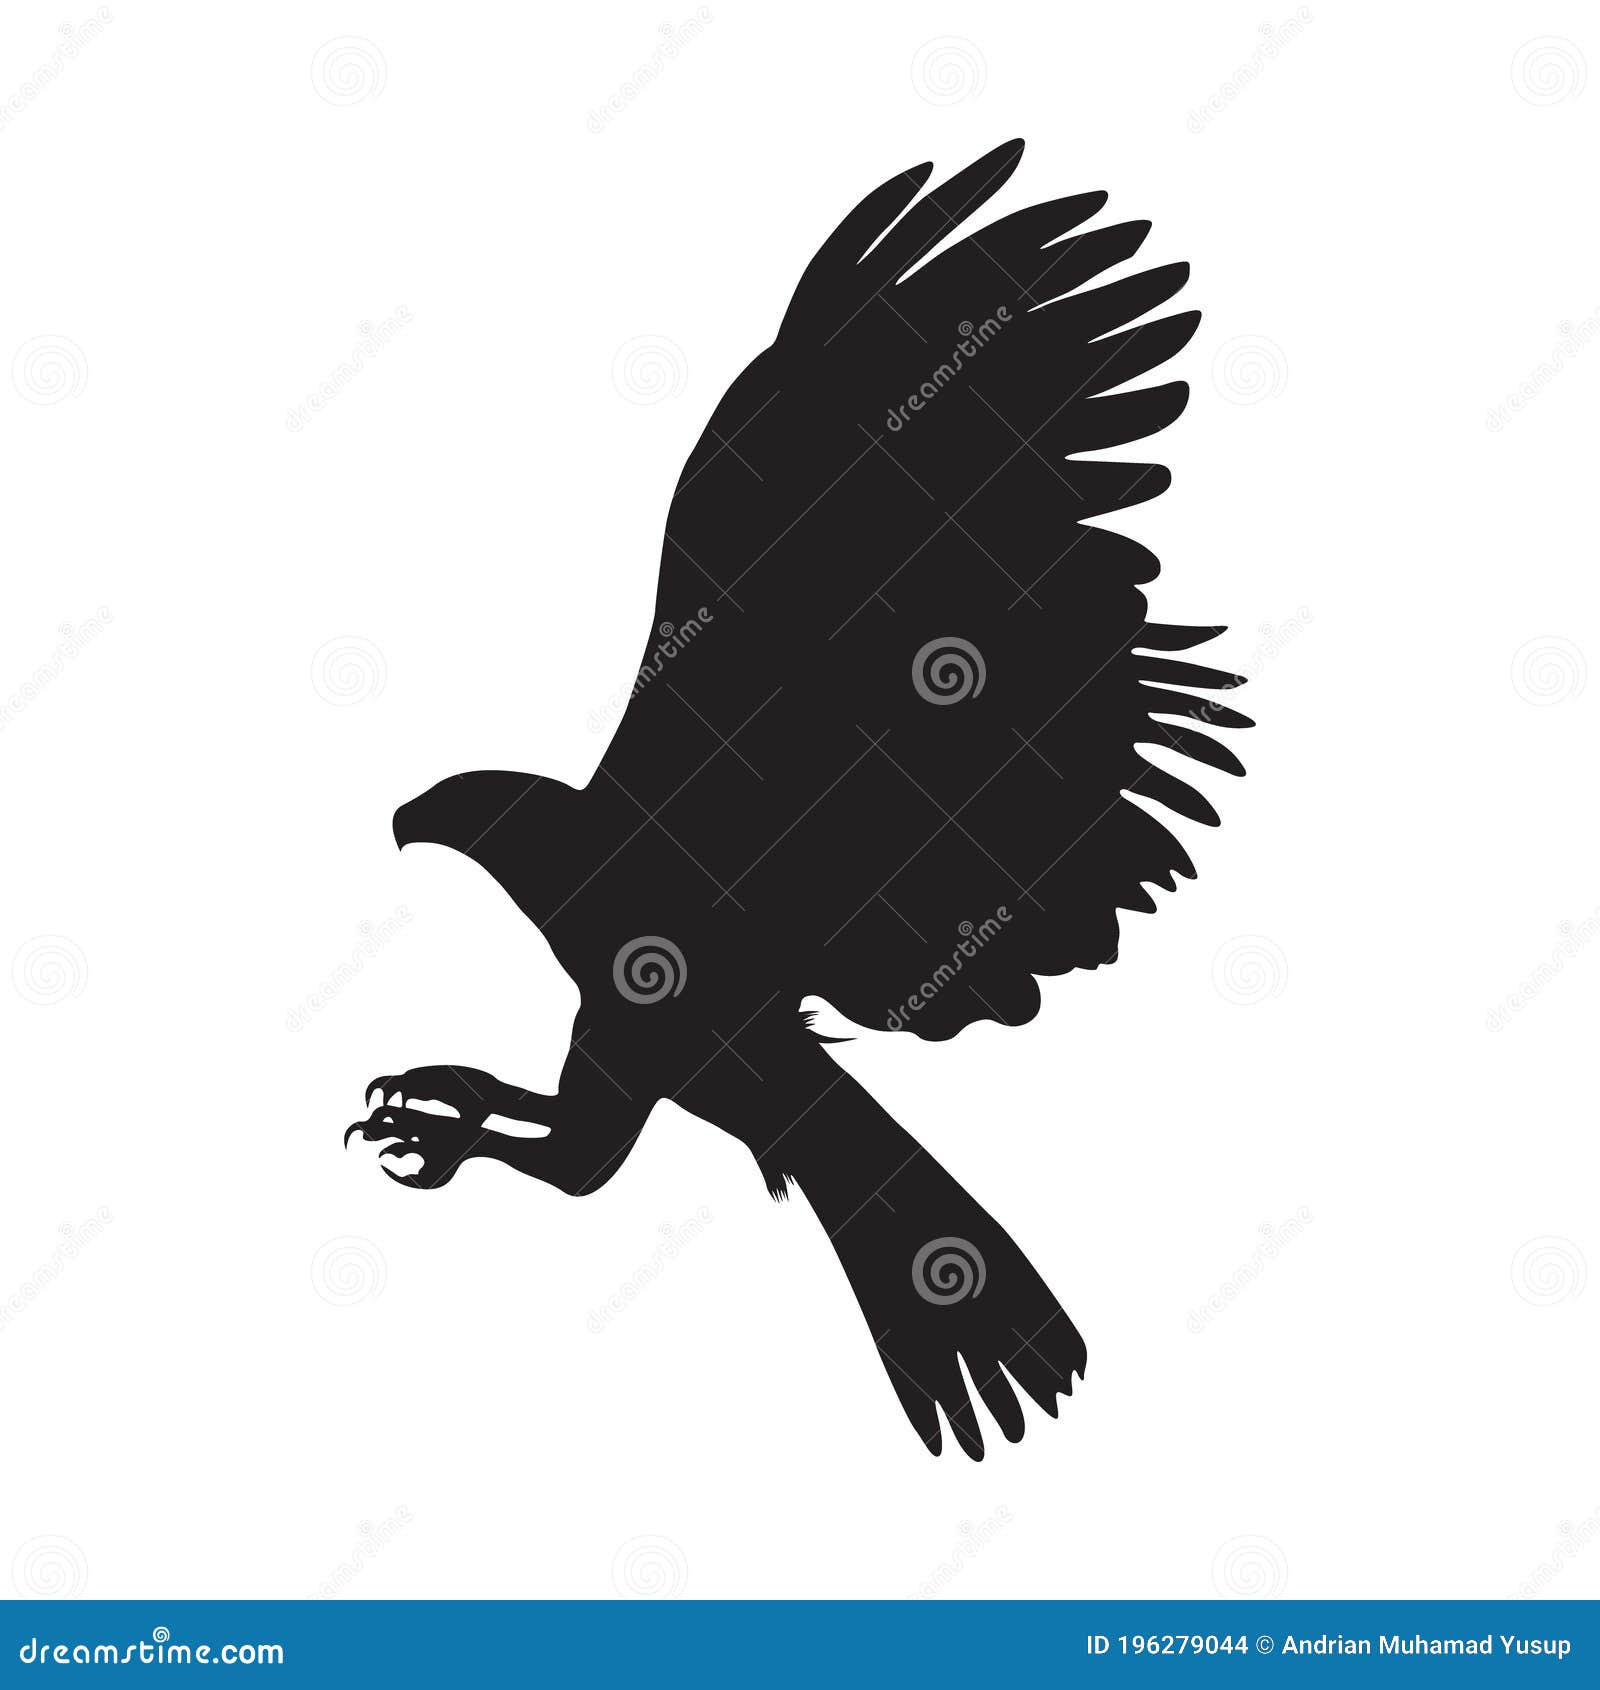 https://thumbs.dreamstime.com/z/flying-harpy-eagle-harpia-harpyja-side-view-silhouette-found-map-western-hemisphere-isolated-white-background-196279044.jpg